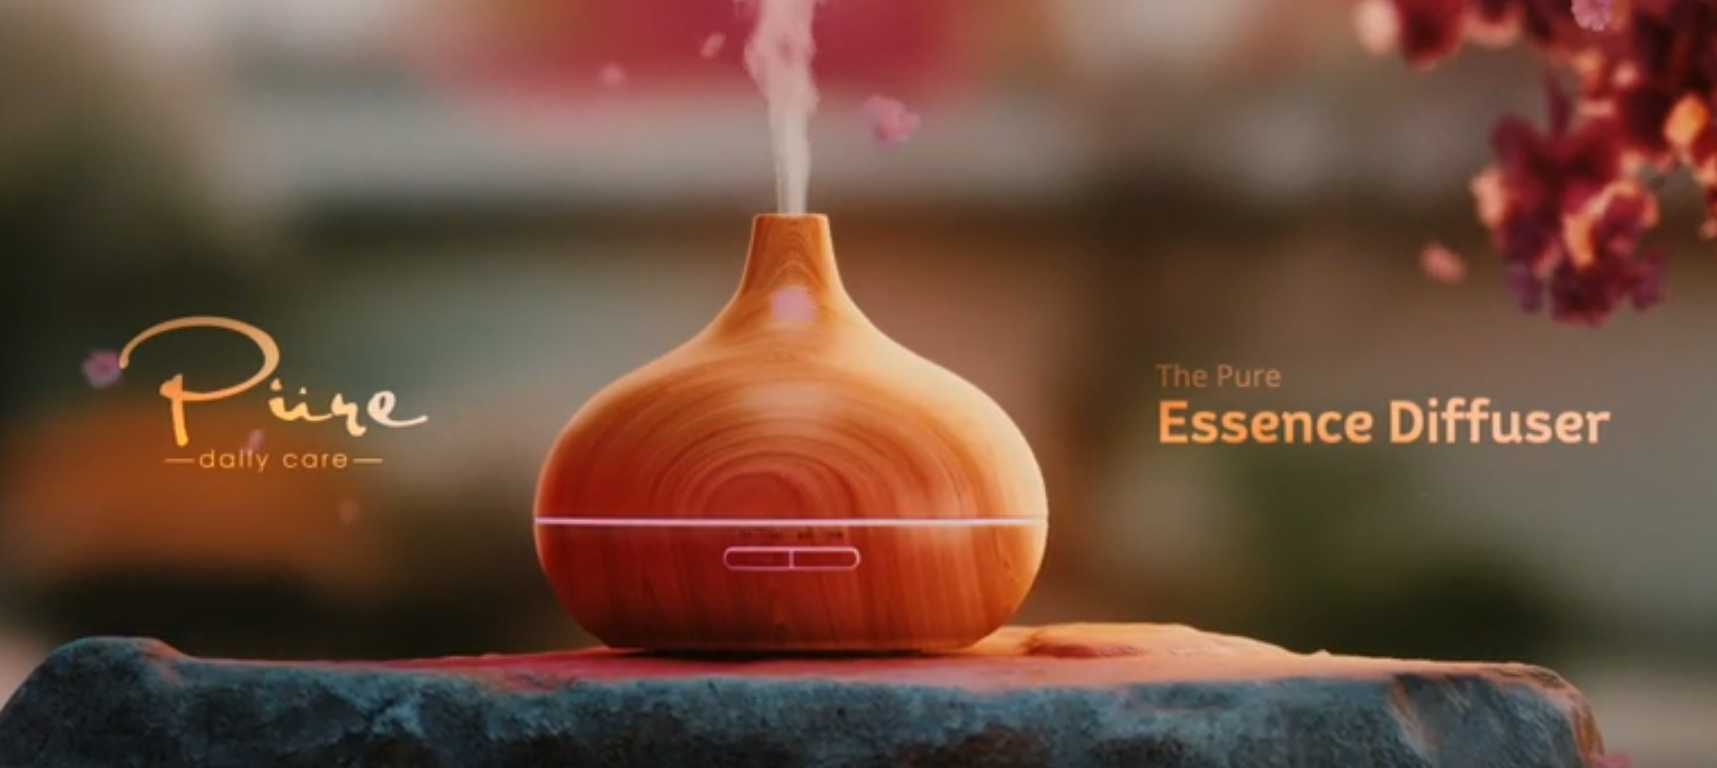 Aromatherapy Diffuser& Essential Oil Set - Ultrasonic Diffuser &Top 10